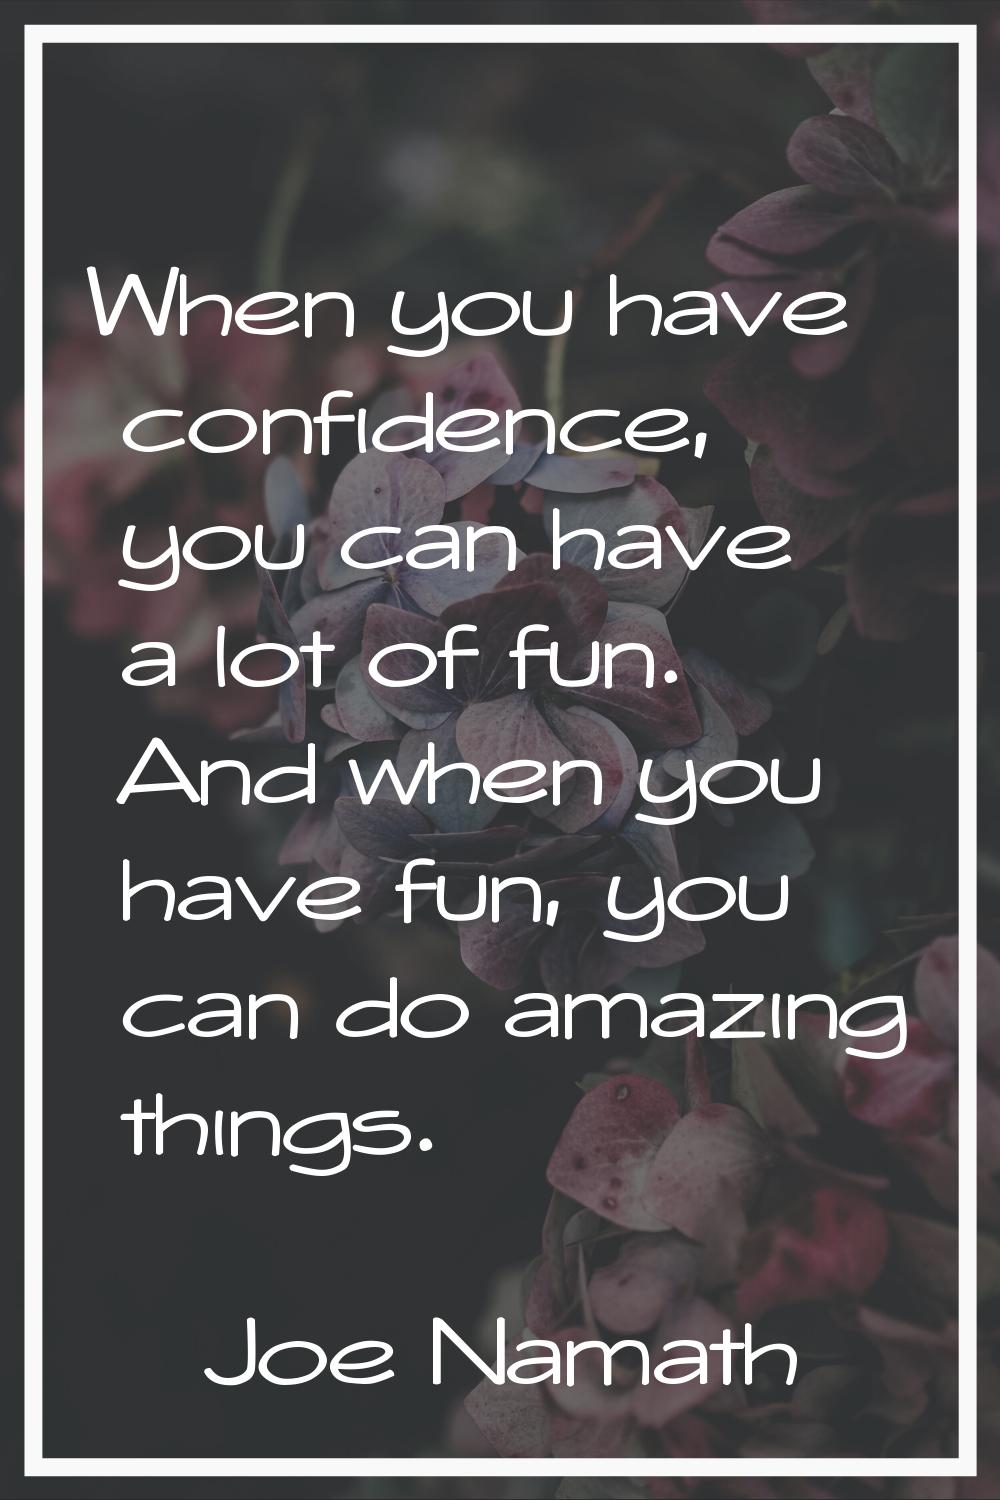 When you have confidence, you can have a lot of fun. And when you have fun, you can do amazing thin